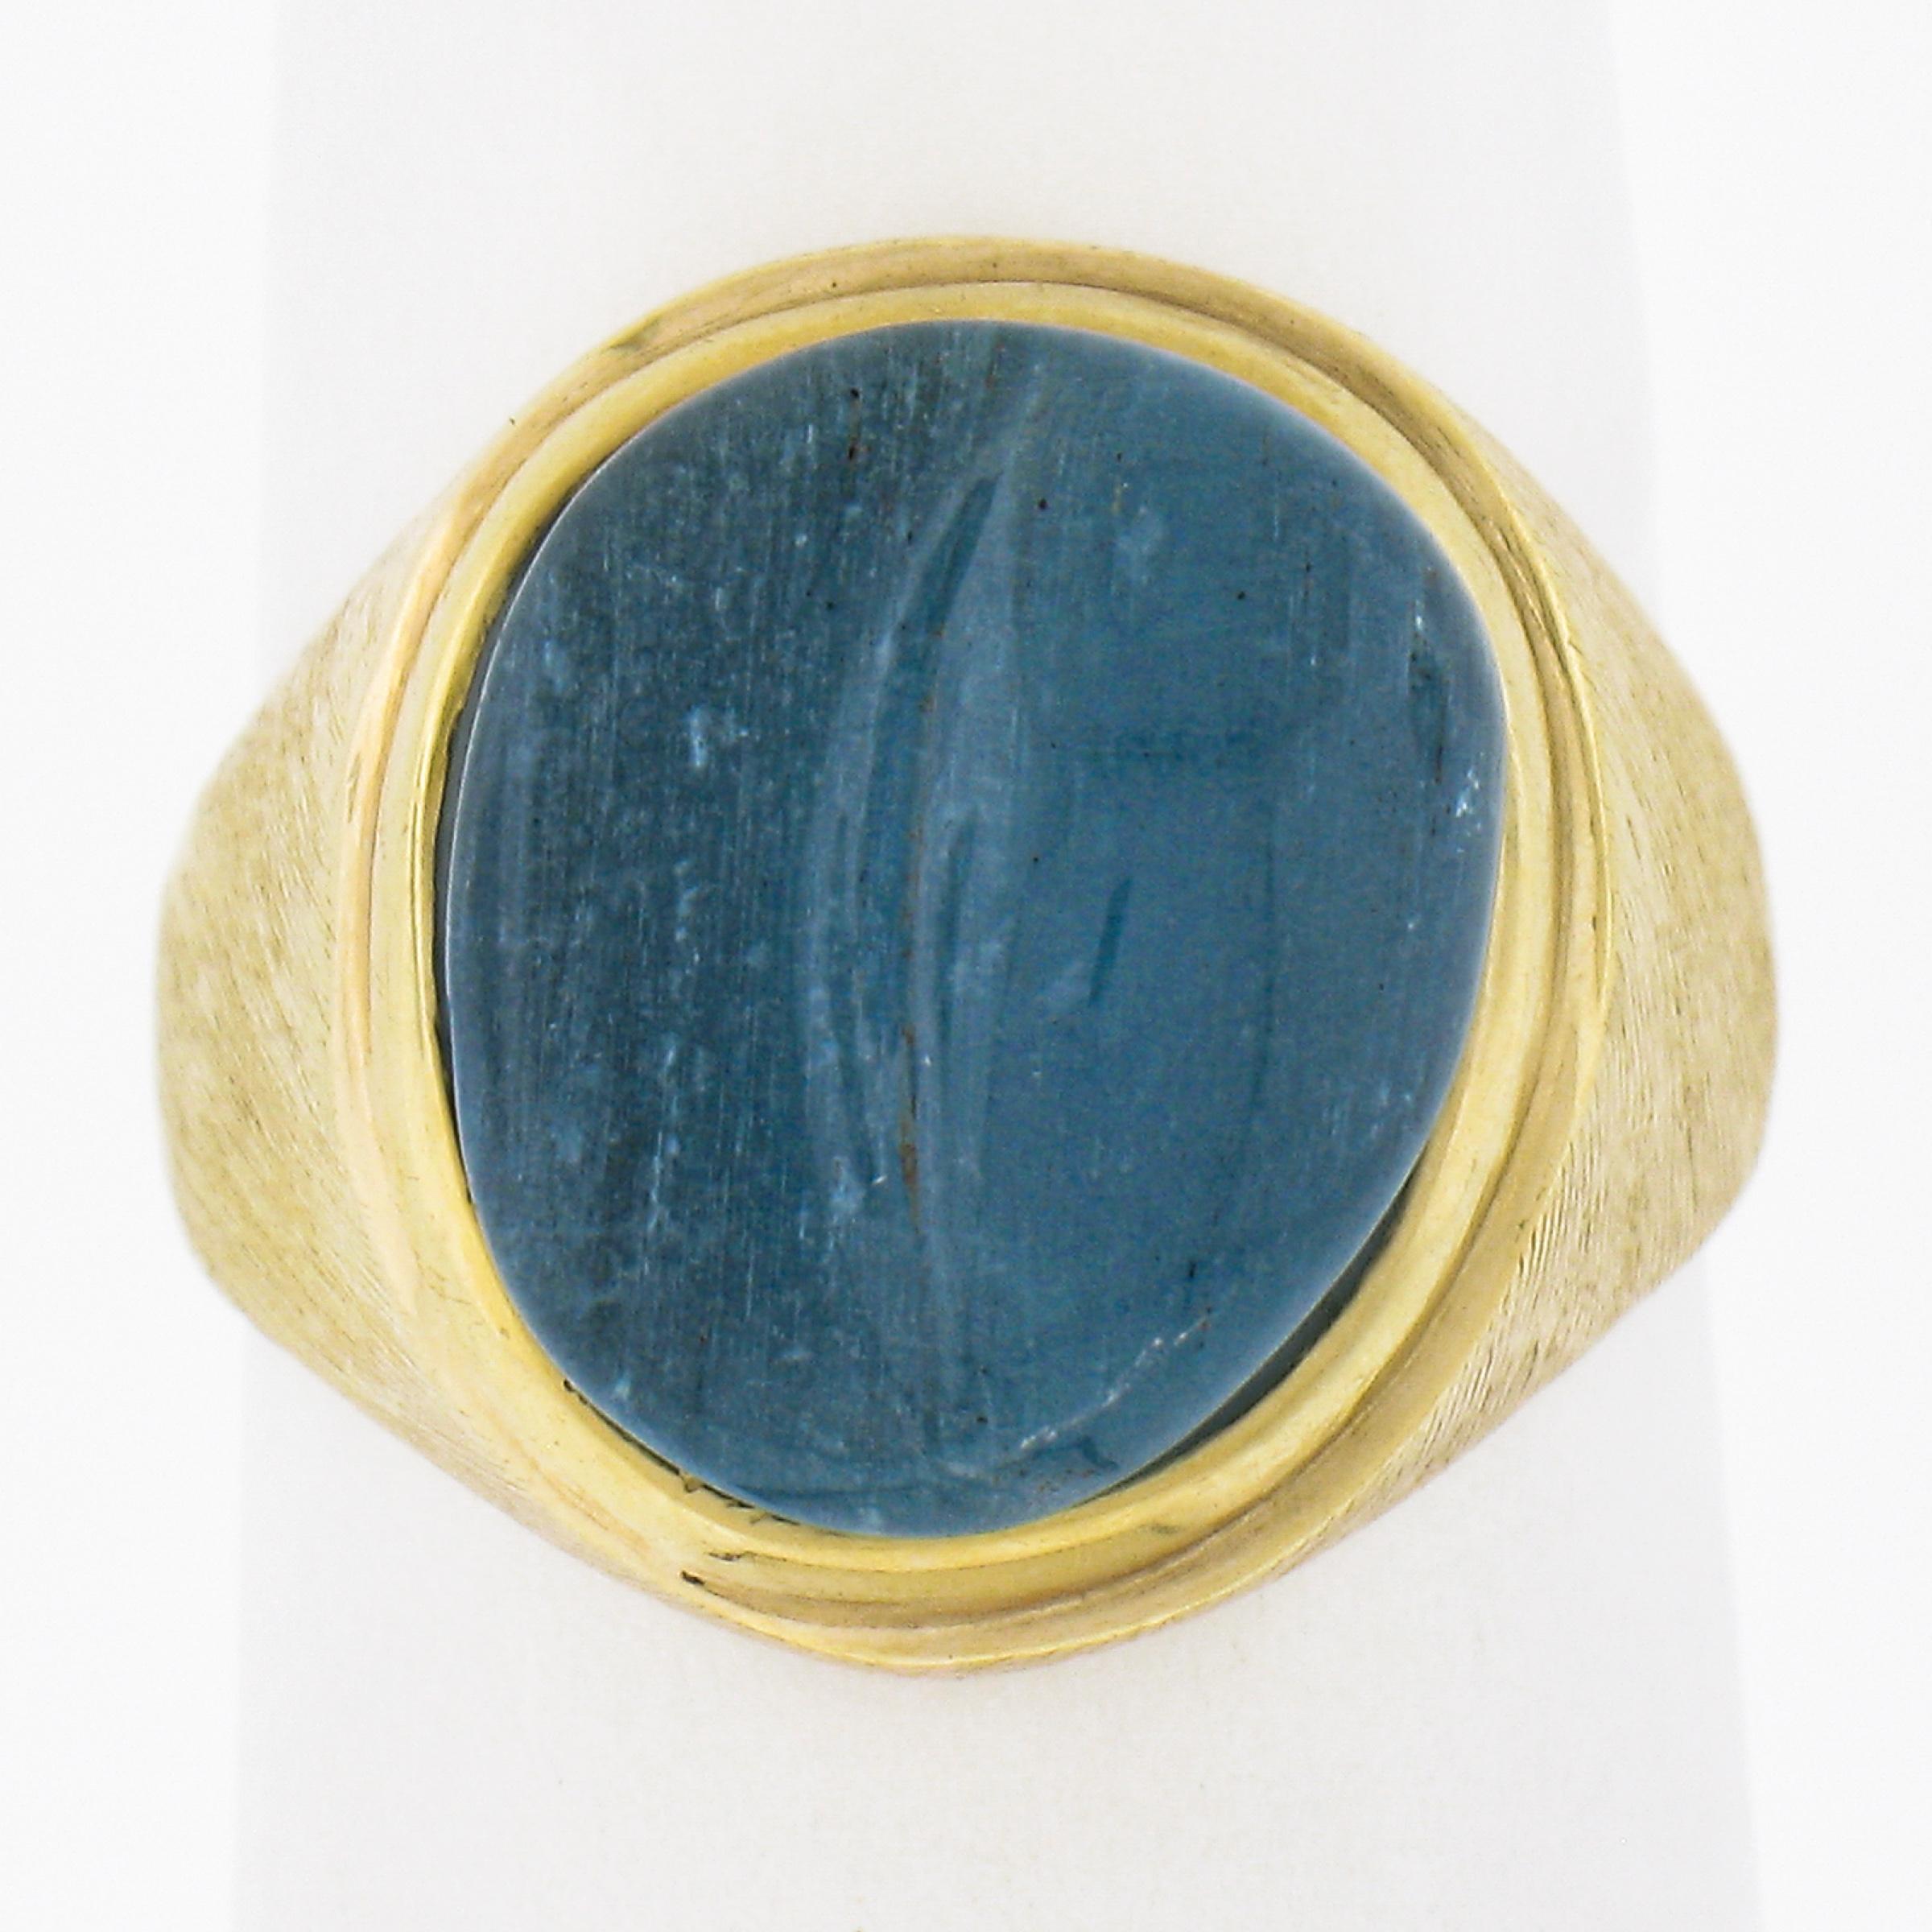 --Stone(s):--
(1) Natural Genuine Carved Aquamarine - Oval Cabochon Cut - Bezel Set - Deep Blue Color - 12.7x10.8mm (approx.)

Material: Solid 18k Yellow Gold
Weight: 5.86 Grams
Ring Size: 4.5 (Fitted on a finger. We can NOT custom size this